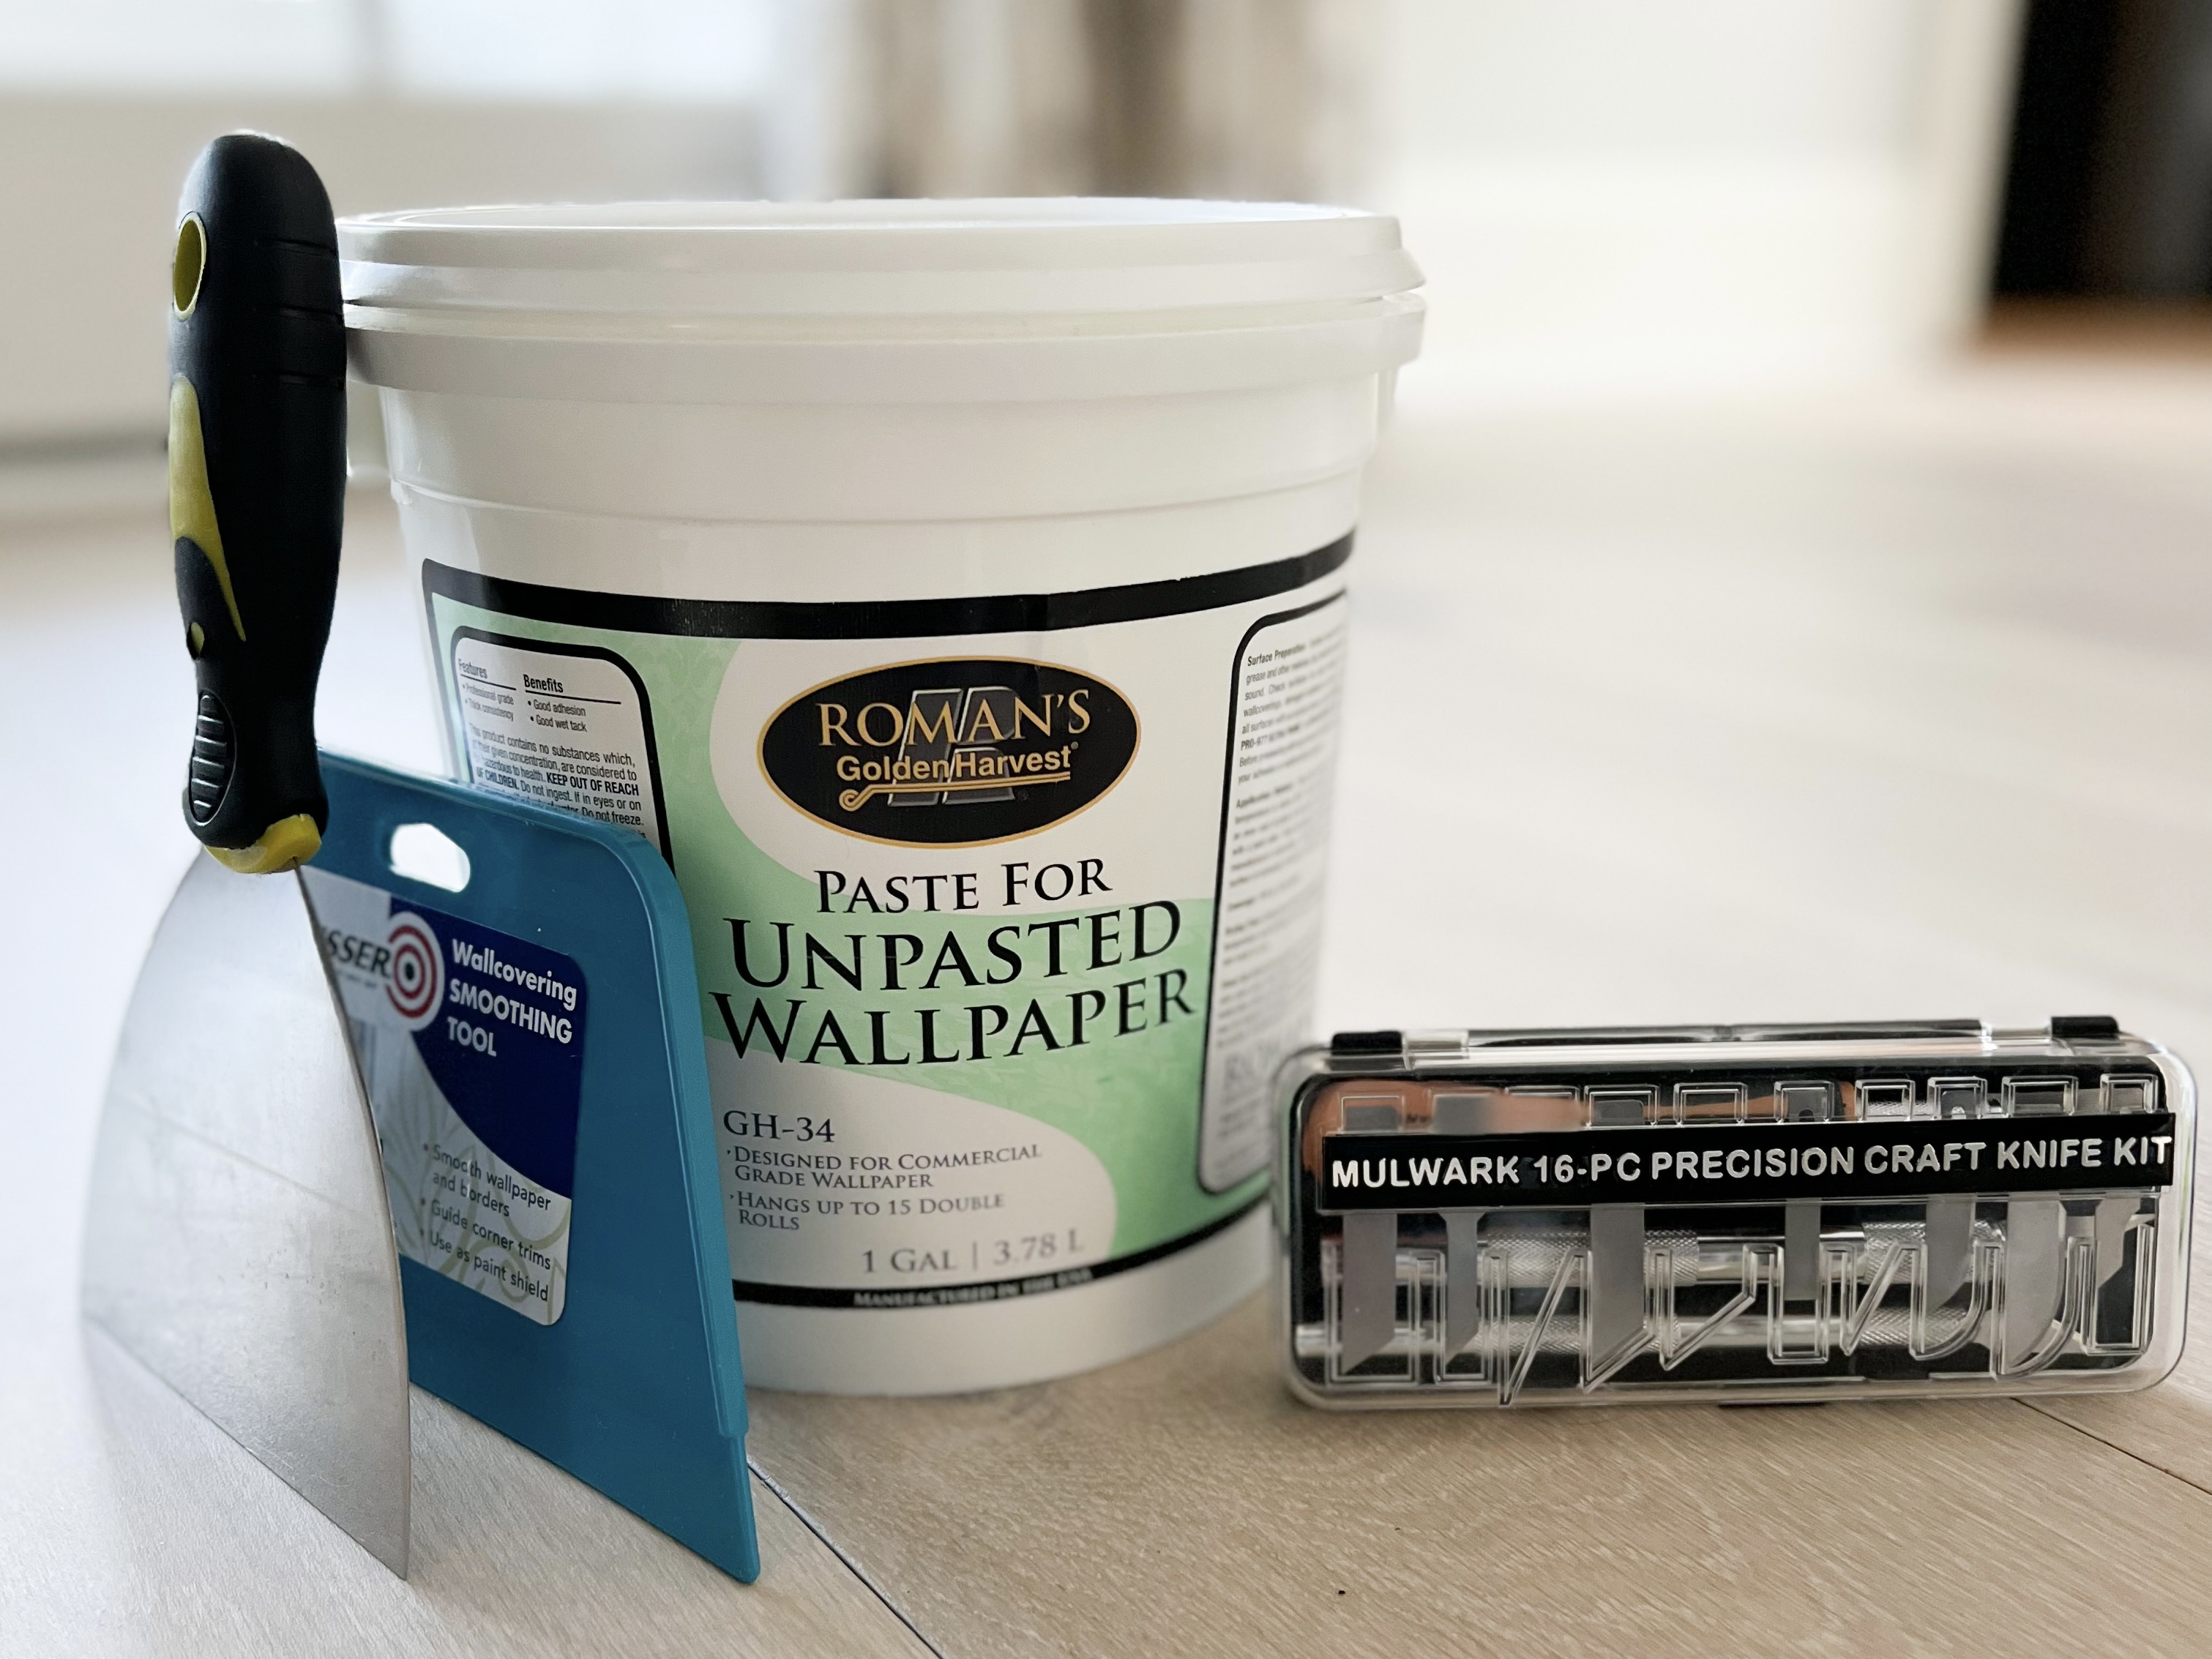 Wallpaper paste and wallpapering tools.